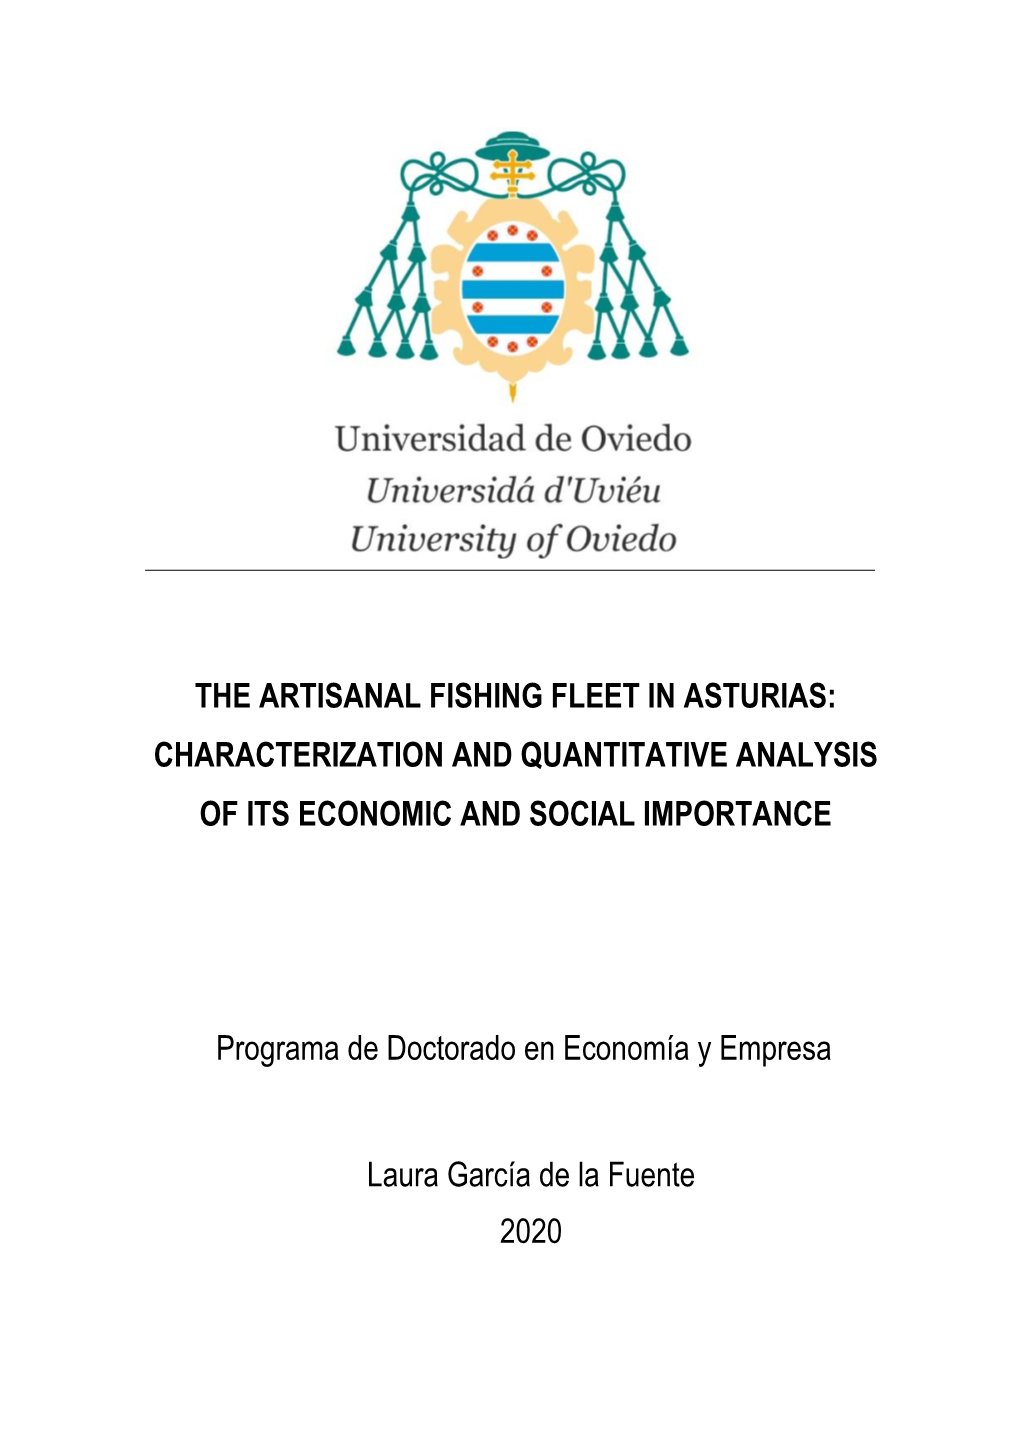 The Artisanal Fishing Fleet in Asturias: Characterization and Quantitative Analysis of Its Economic and Social Importance